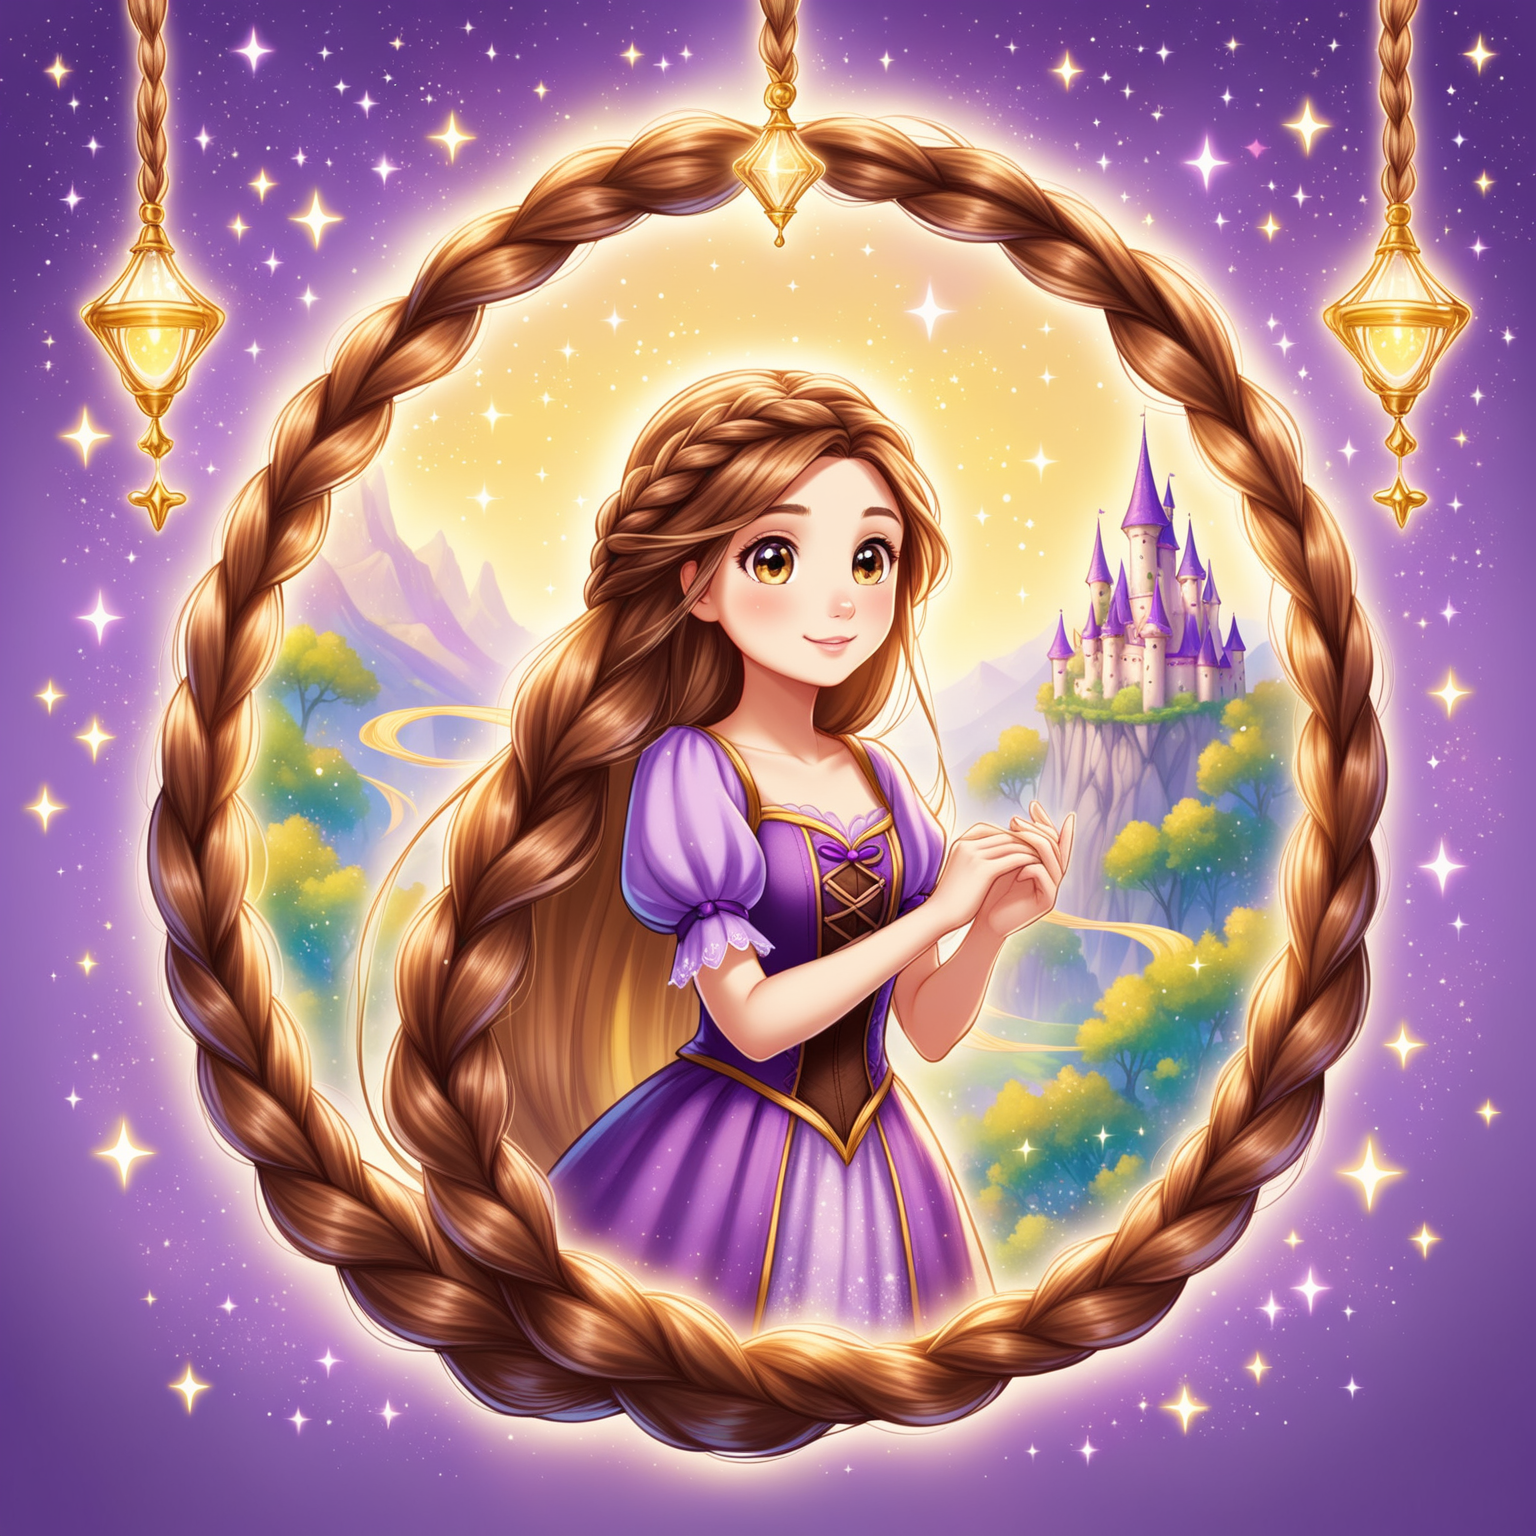 Whimsical Rapunzel with Long Brown Braid in Enchanting Purple and Yellow Setting